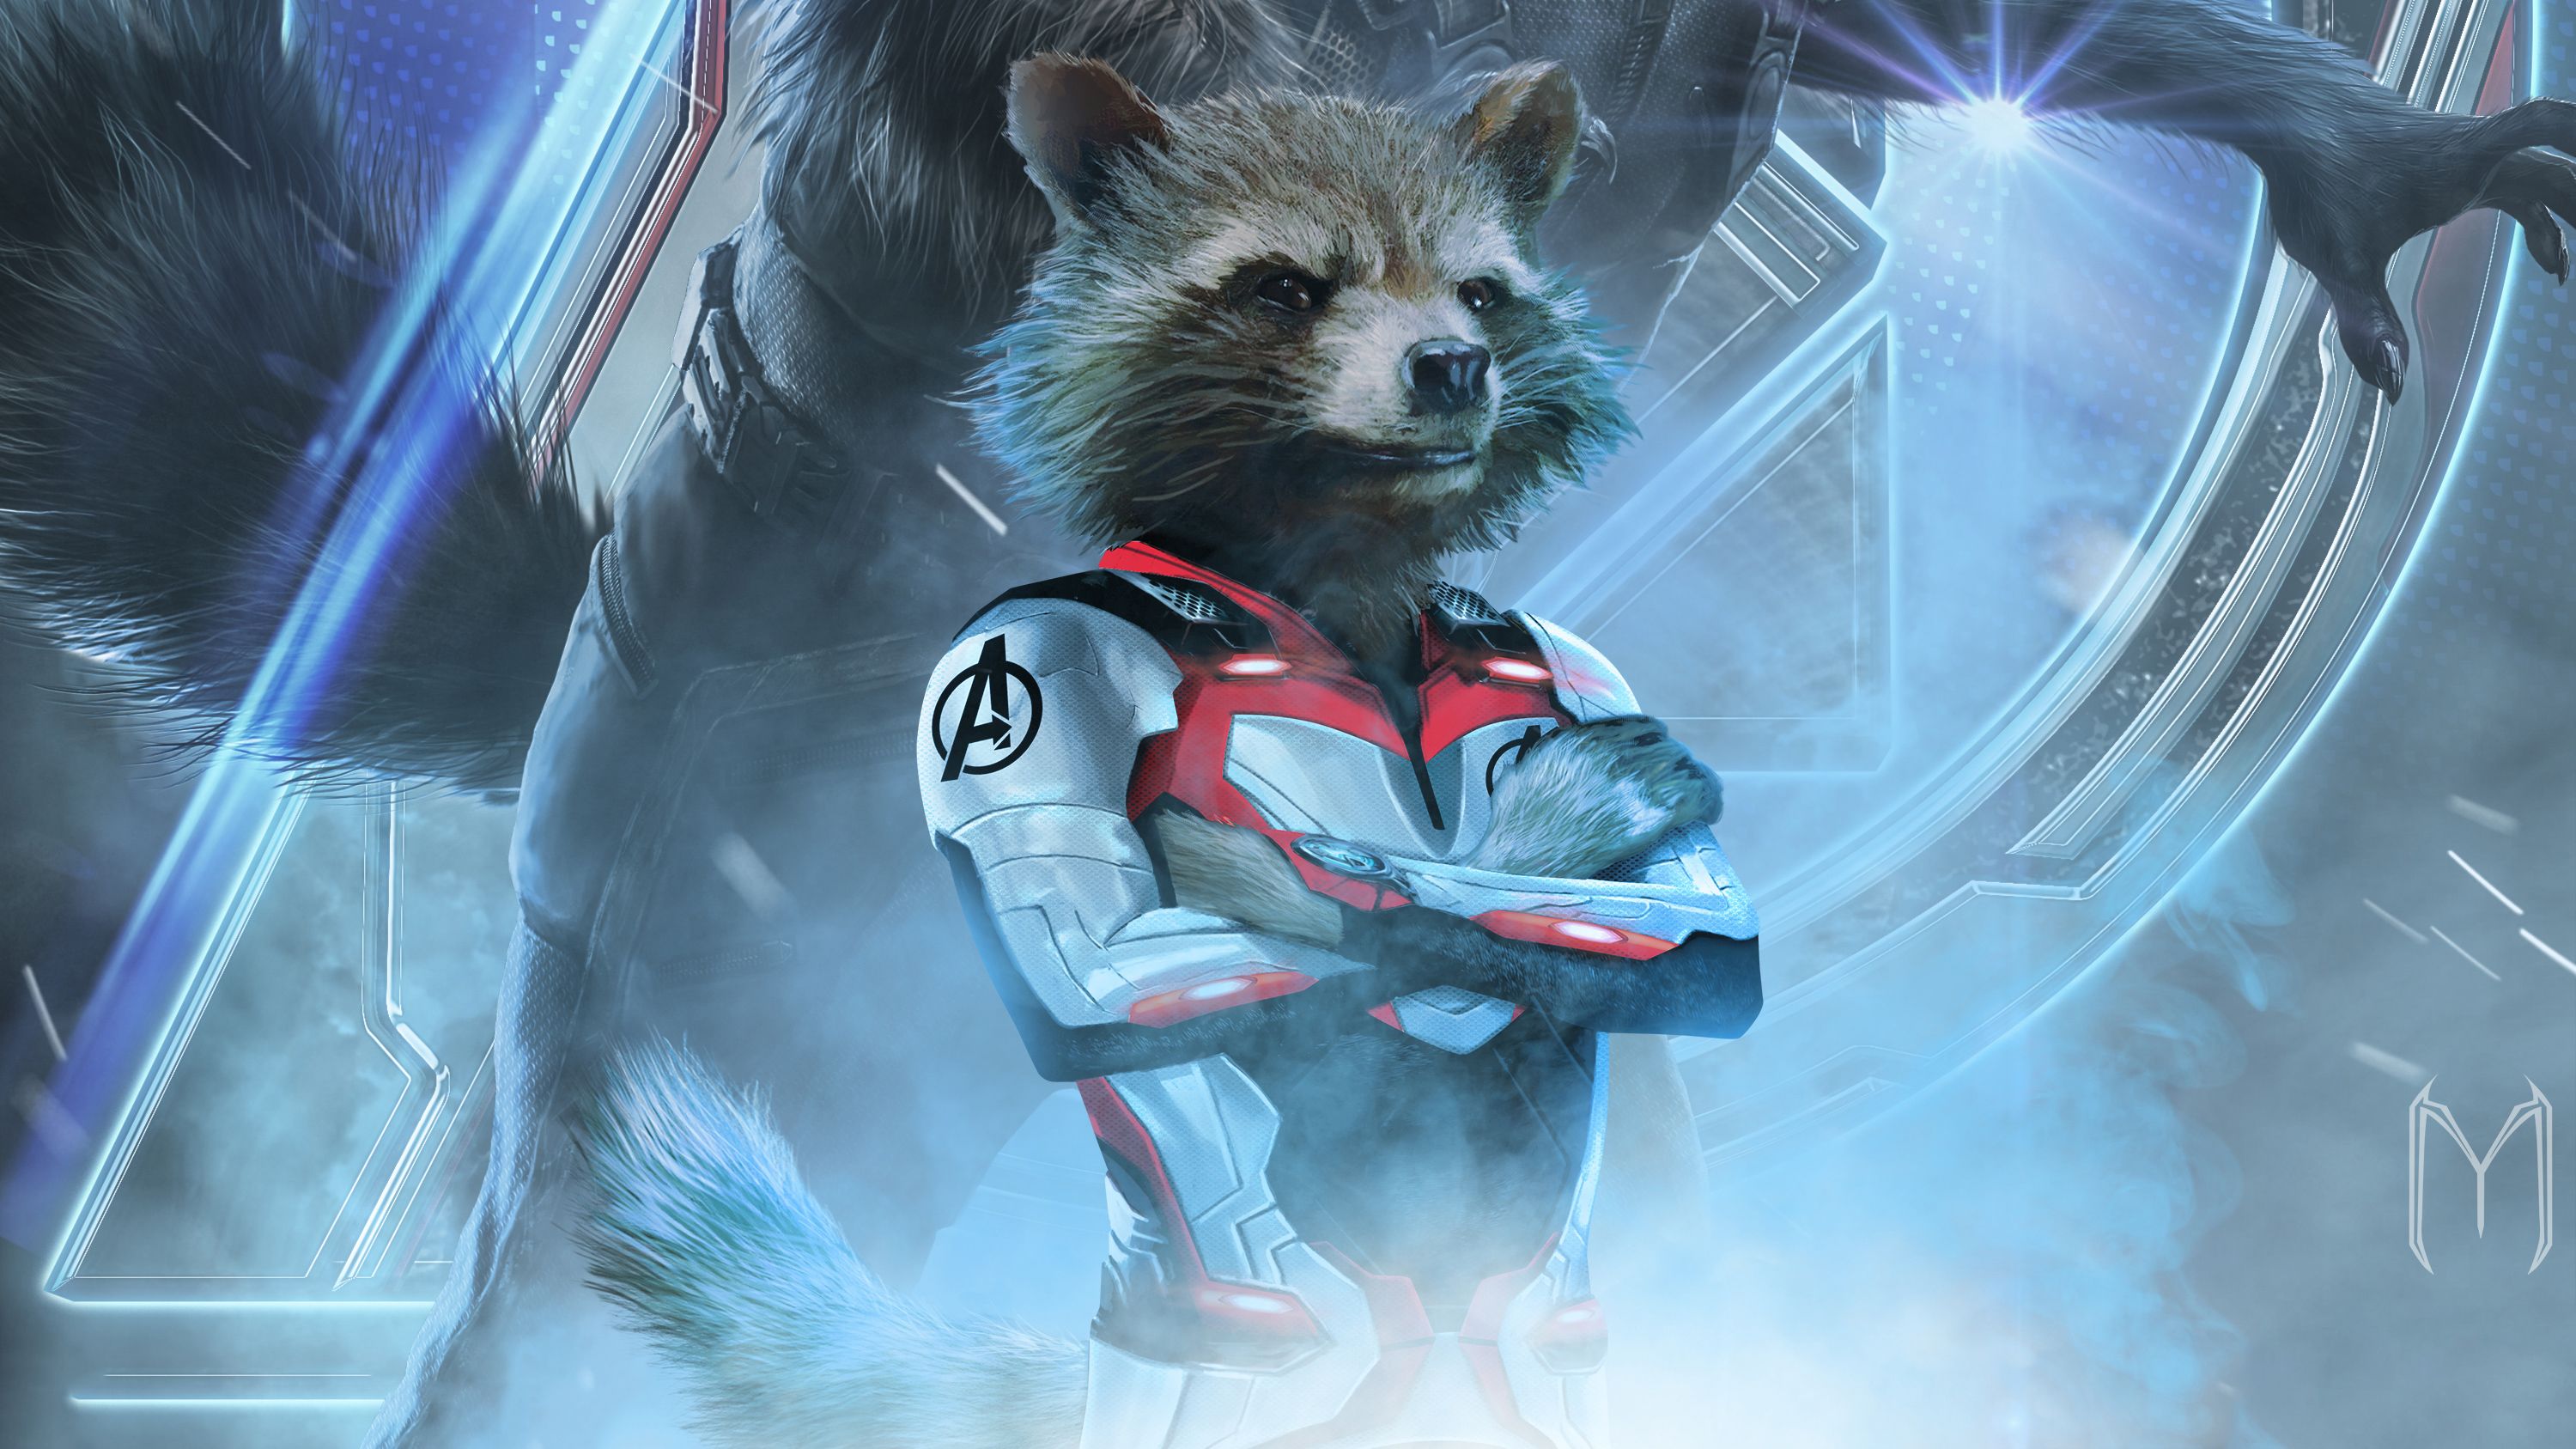 Rocket Raccoon In Avengers Endgame HD Movies, 4k Wallpaper, Image, Background, Photo and Picture